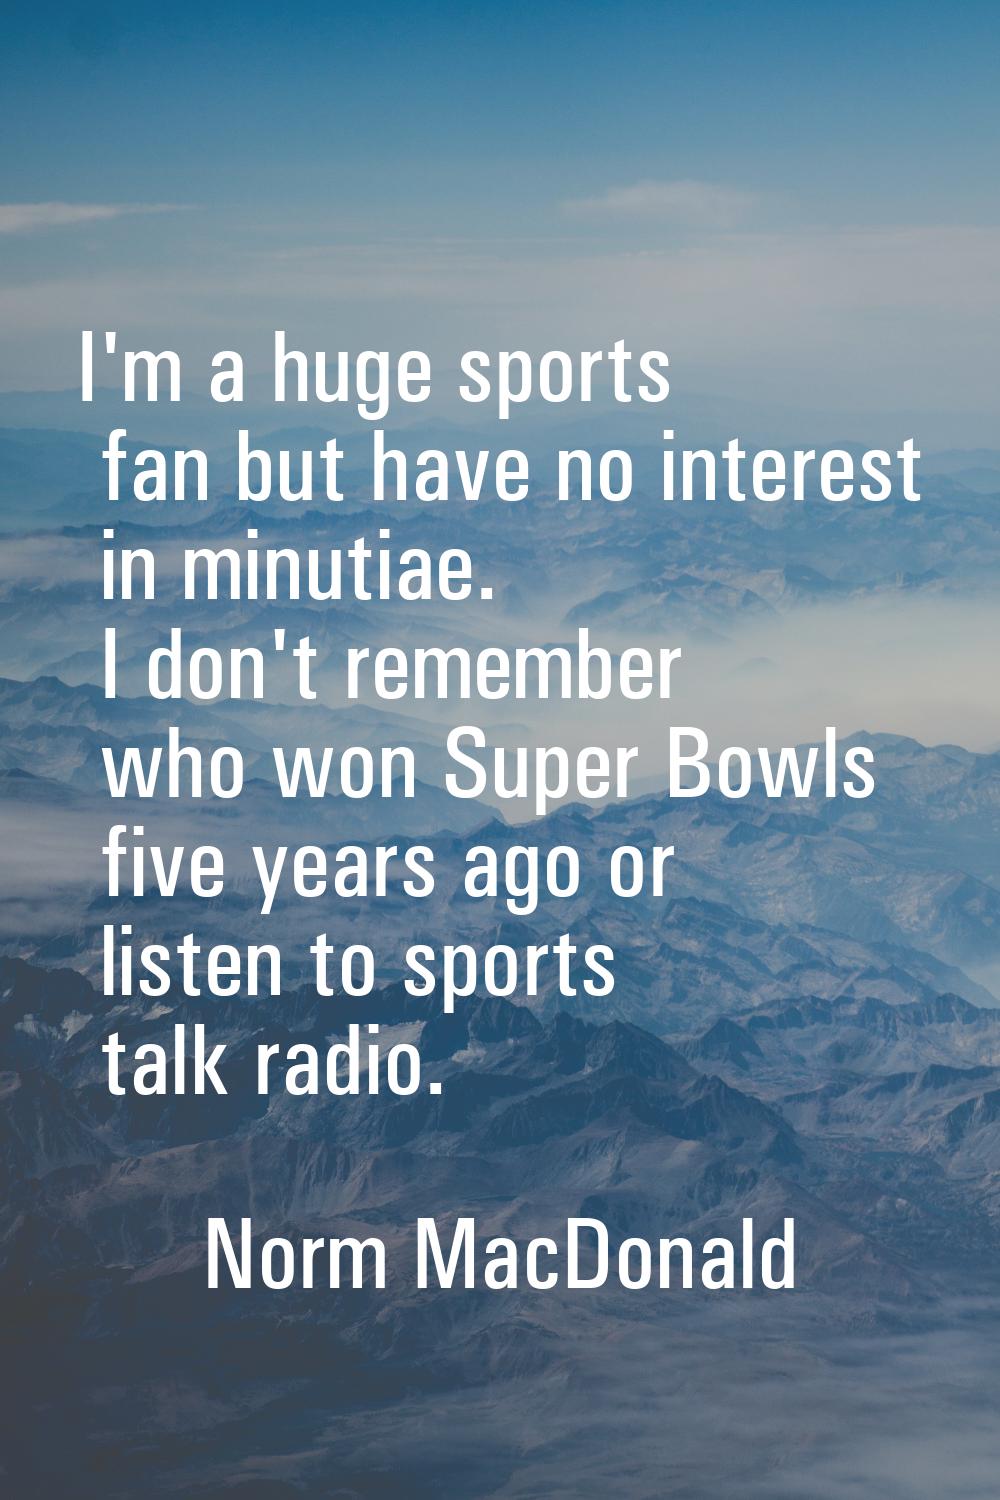 I'm a huge sports fan but have no interest in minutiae. I don't remember who won Super Bowls five y